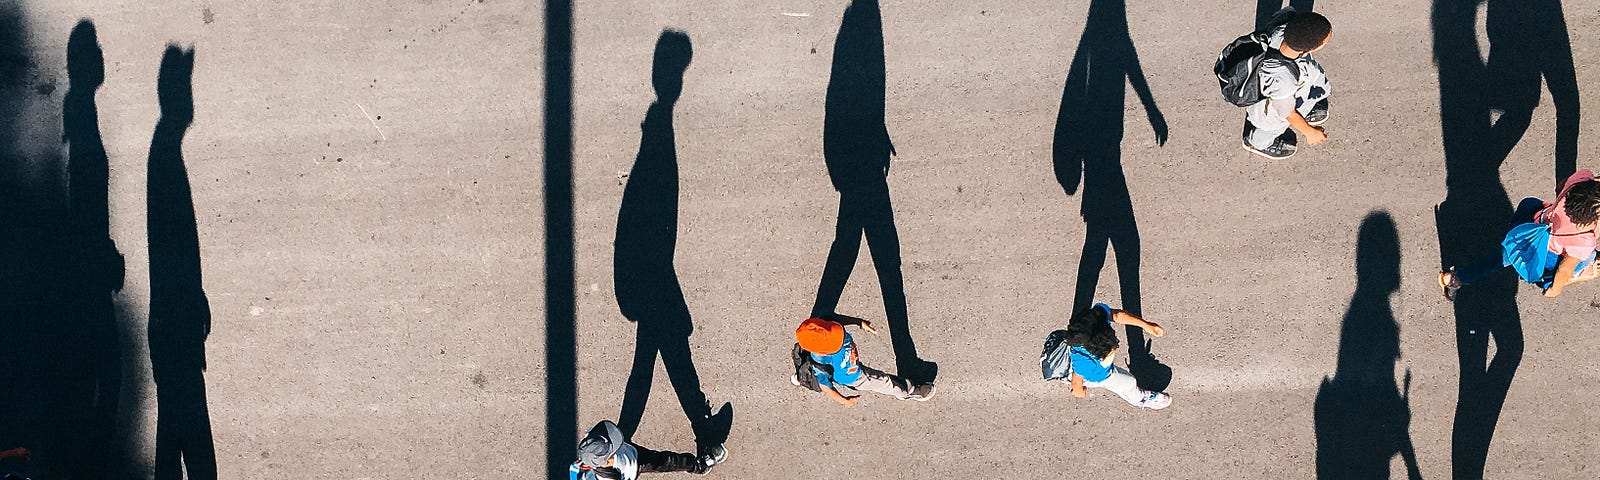 photo taken from above of people walking on the street and their large shadow silhouettes.